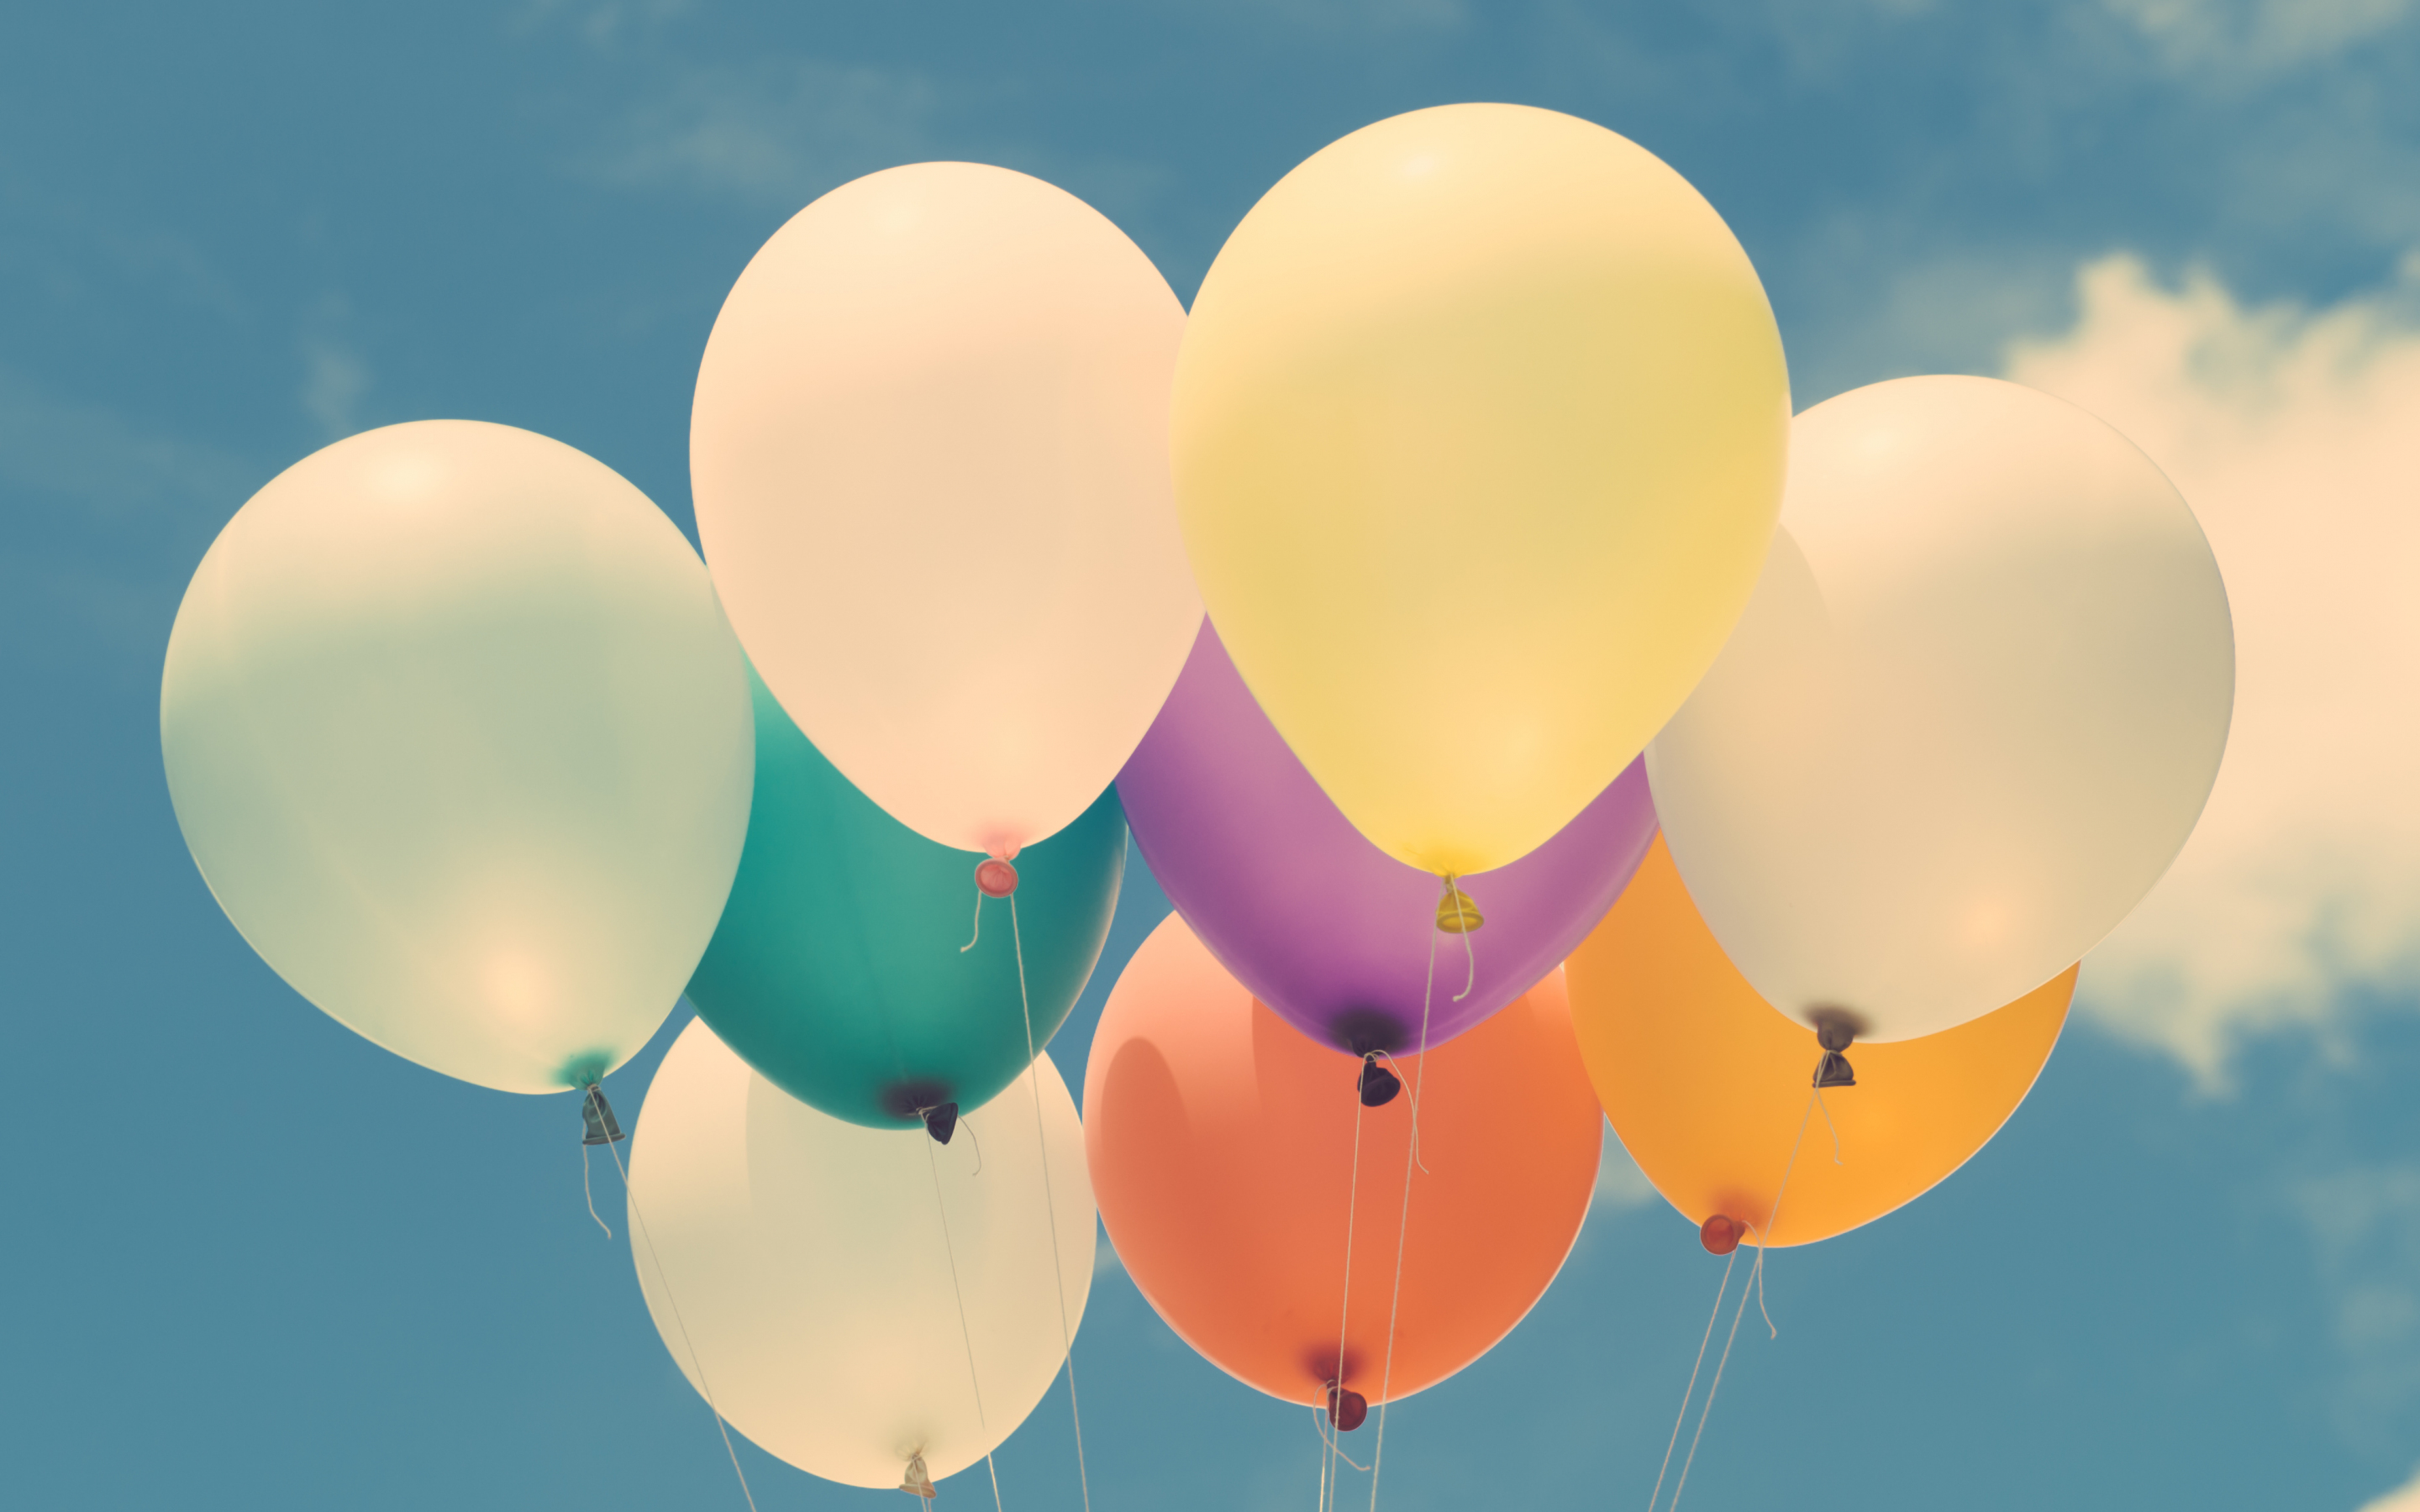 Balloons, colorful, sky, 2880x1800 wallpaper